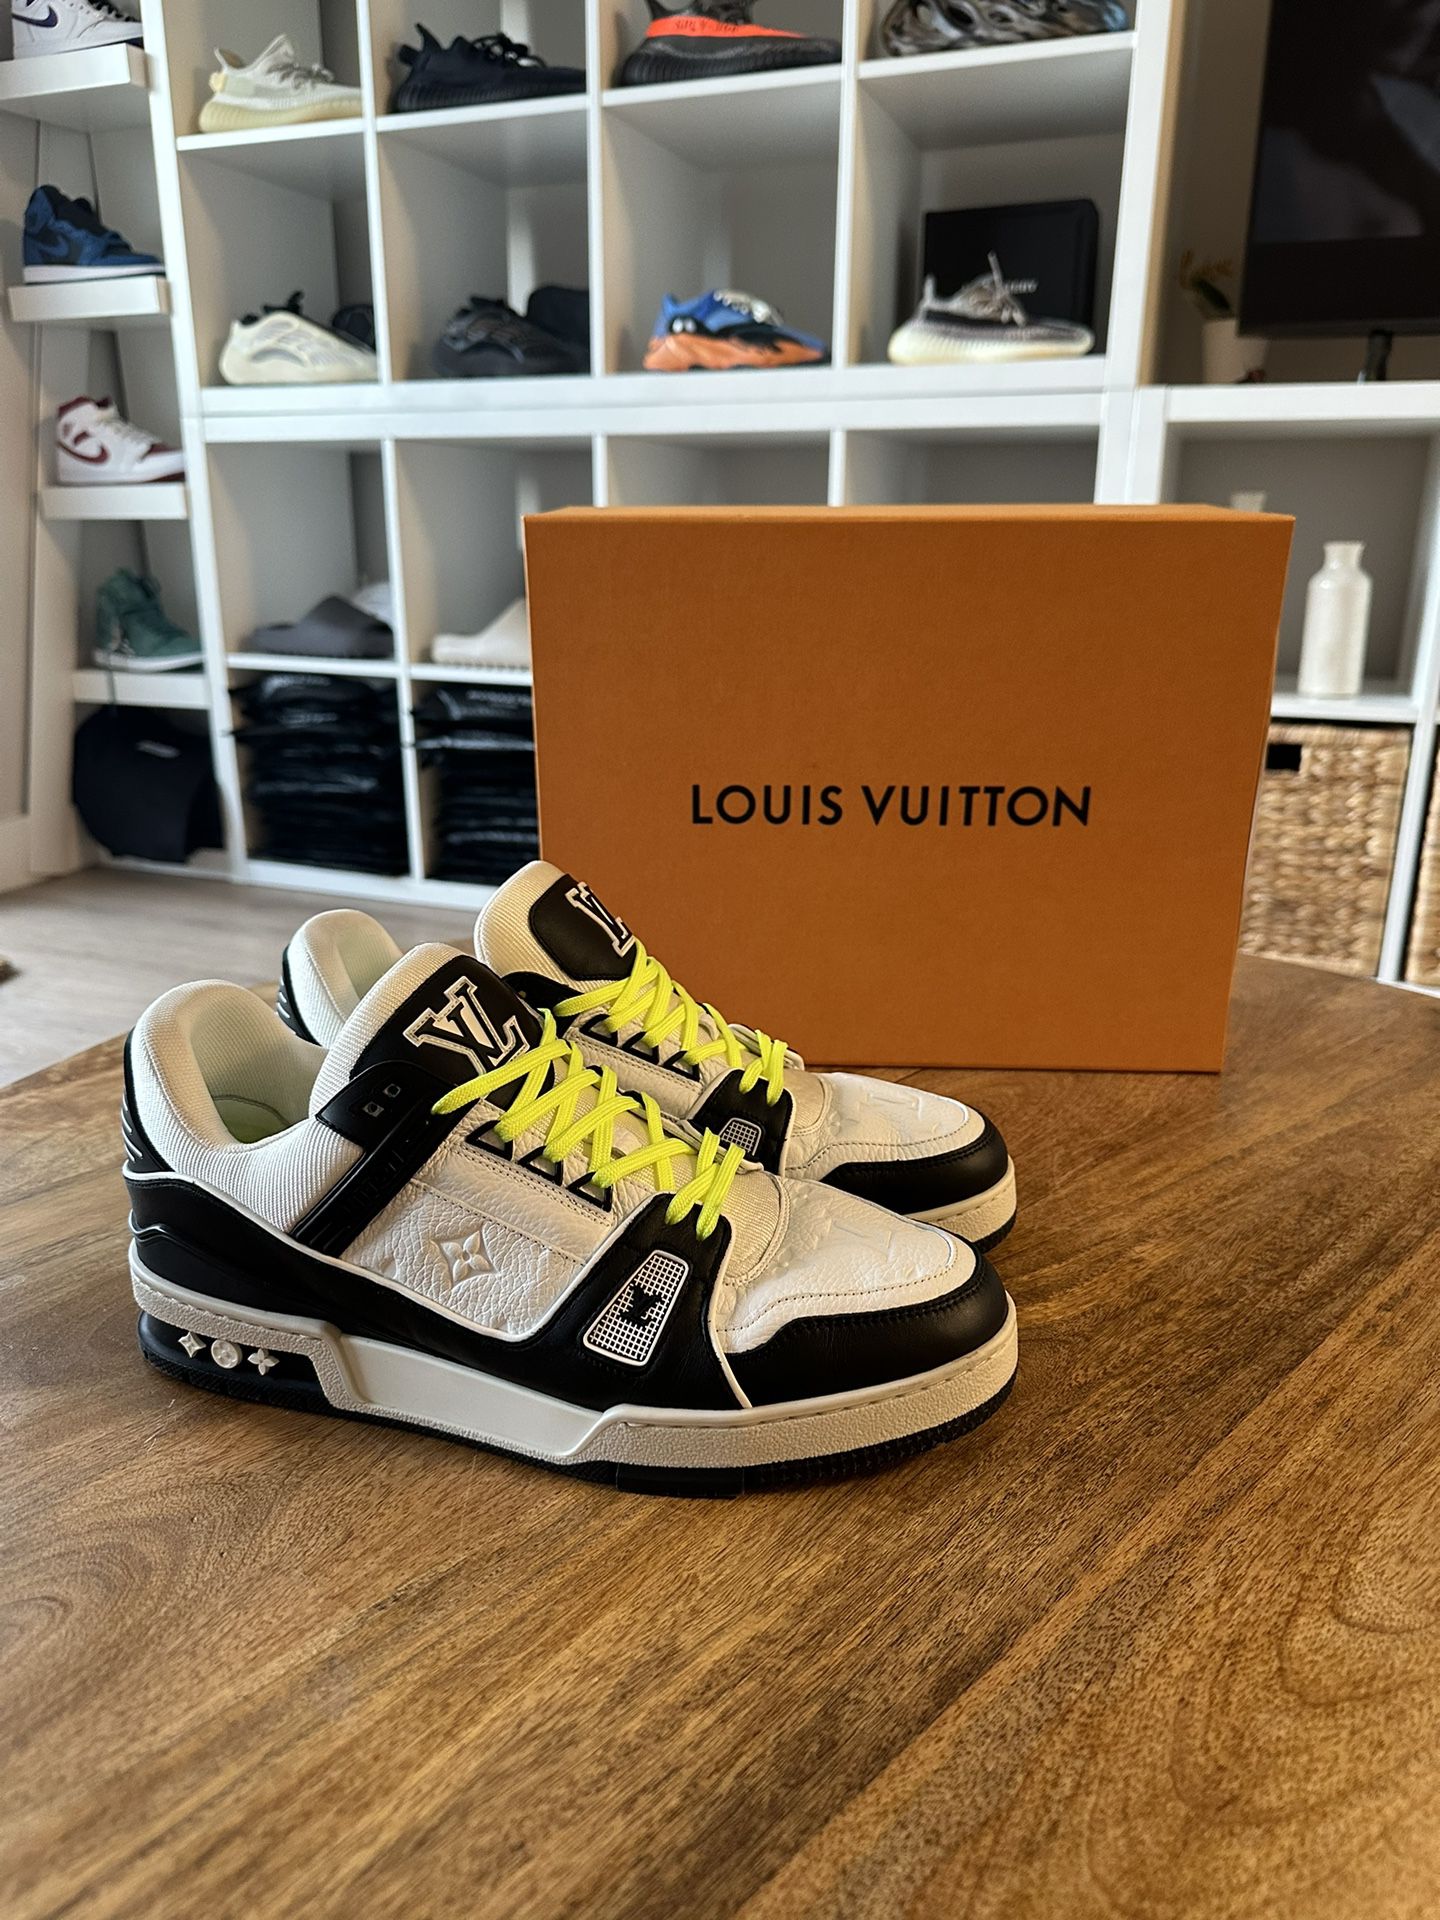 Louis Vuitton Lv Trainer Black Size 9 Pads for Sale in Aventura, FL -  OfferUp